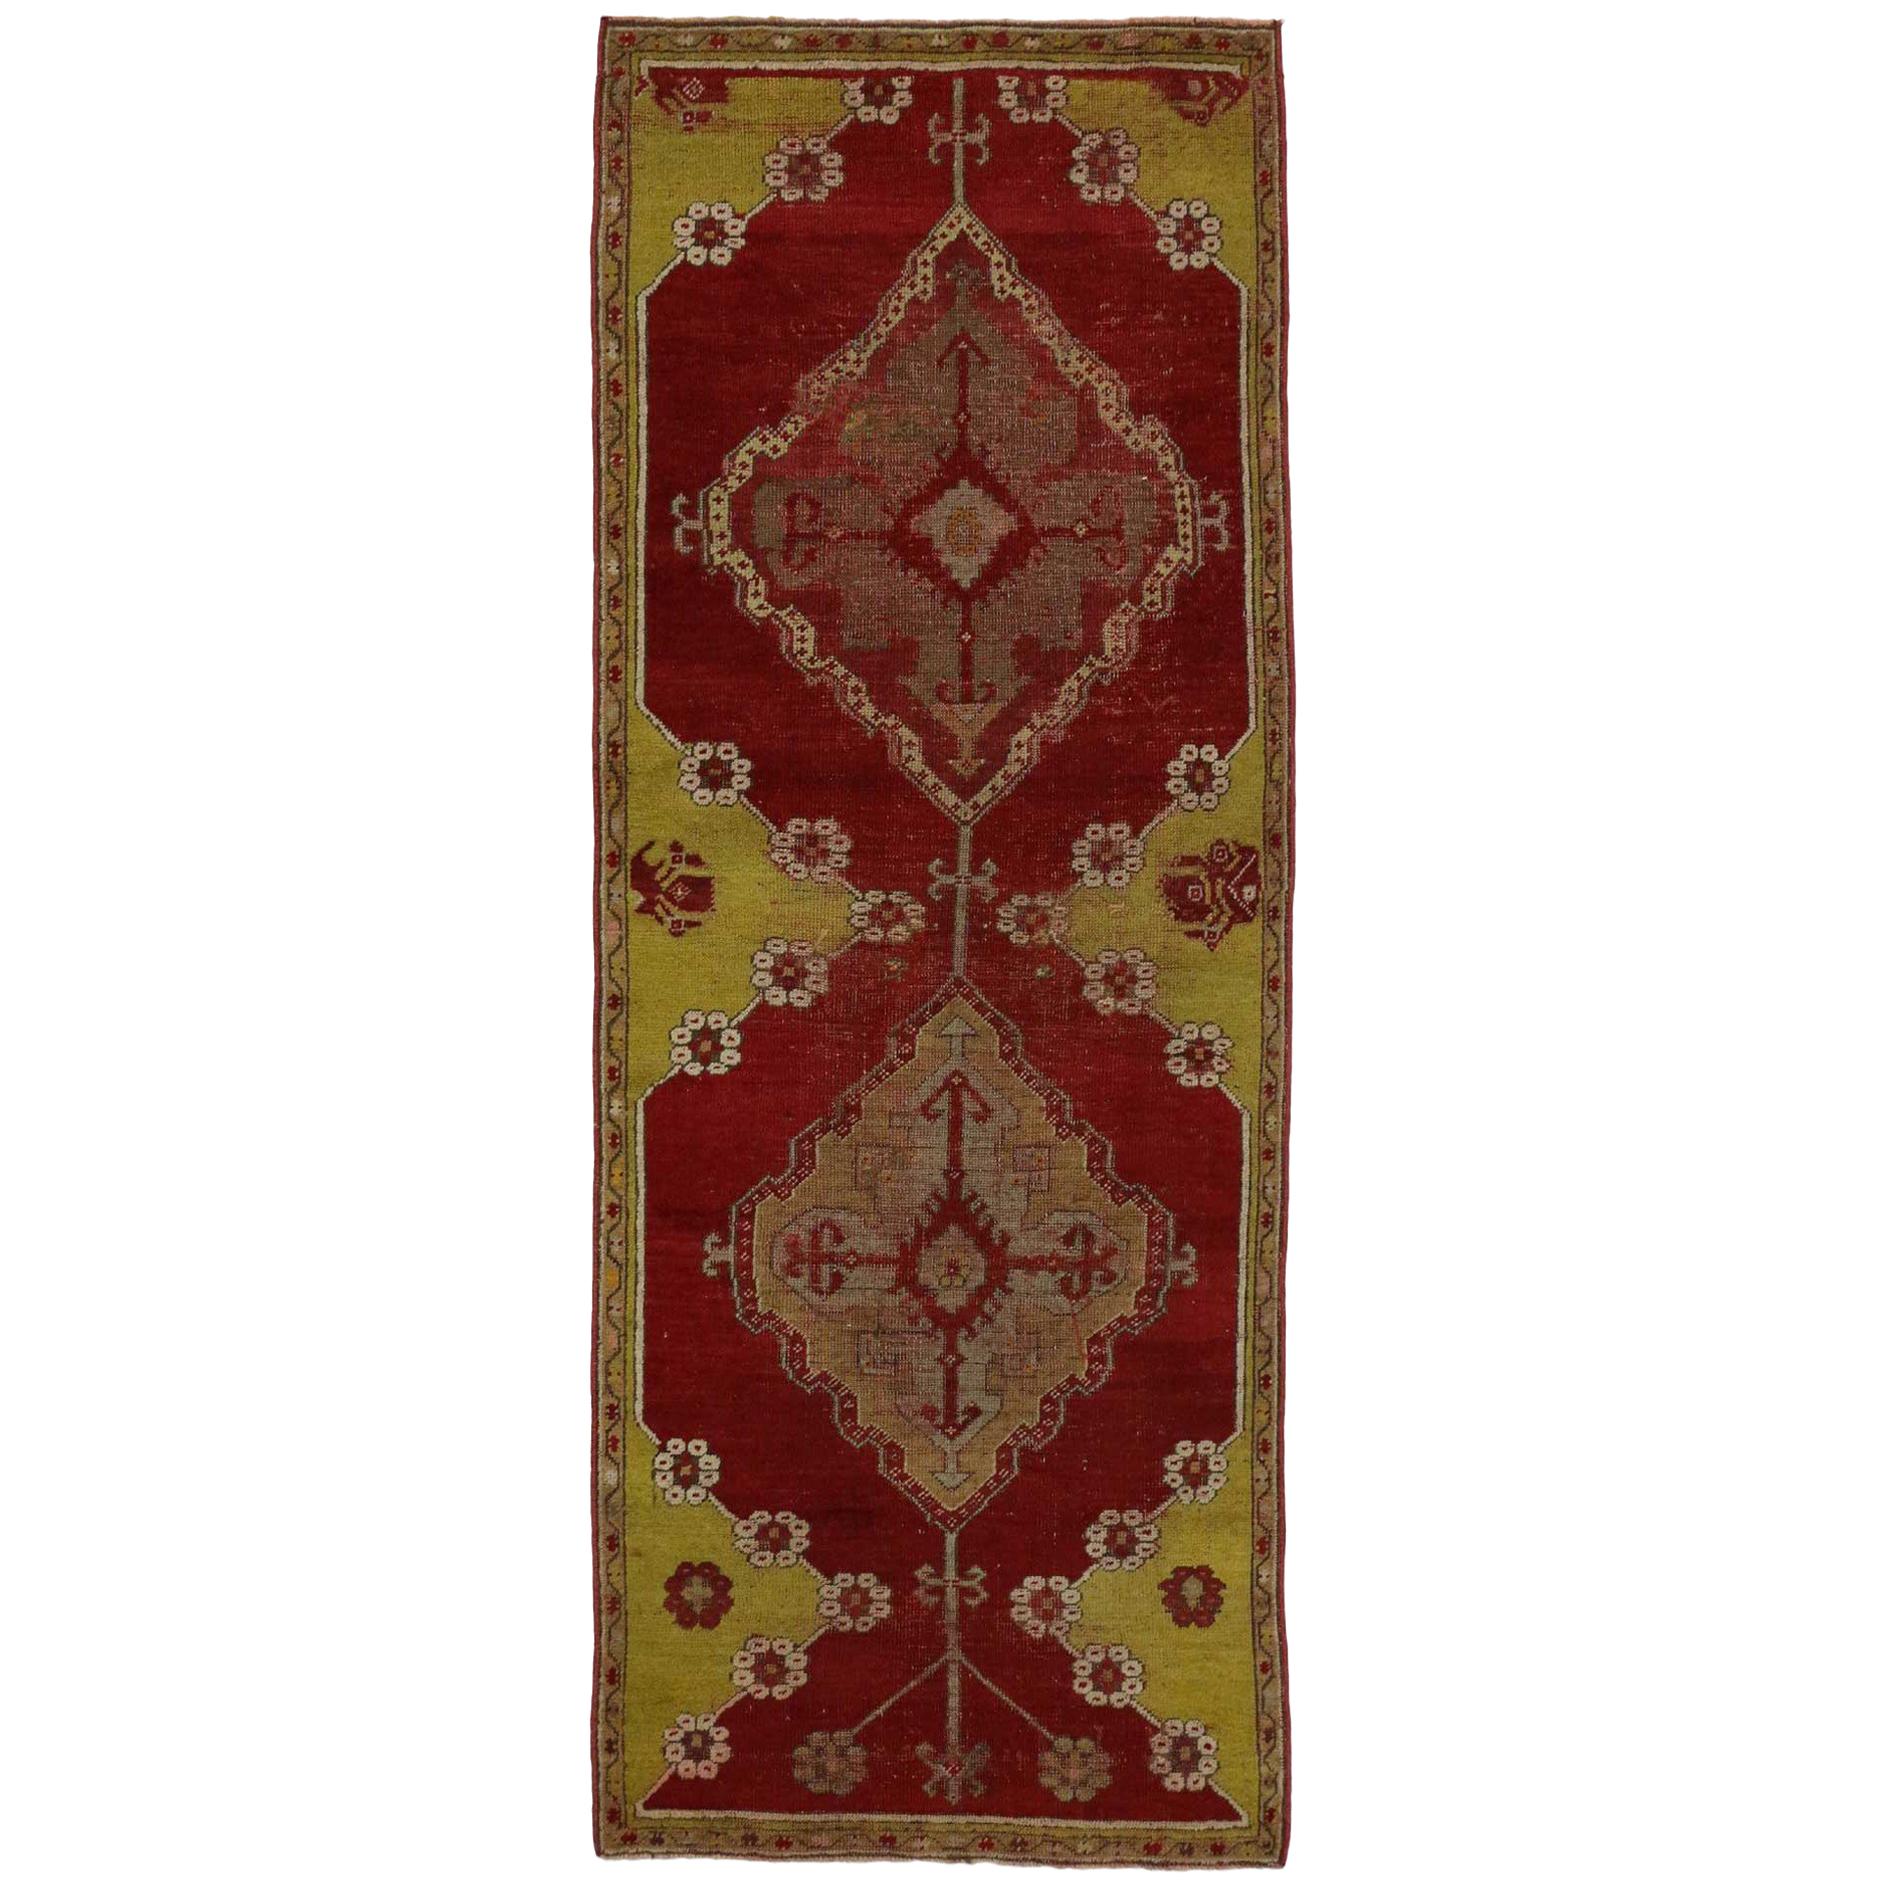 Distressed Vintage Turkish Oushak Rug with Jacobean Style, Foyer or Entry Rug